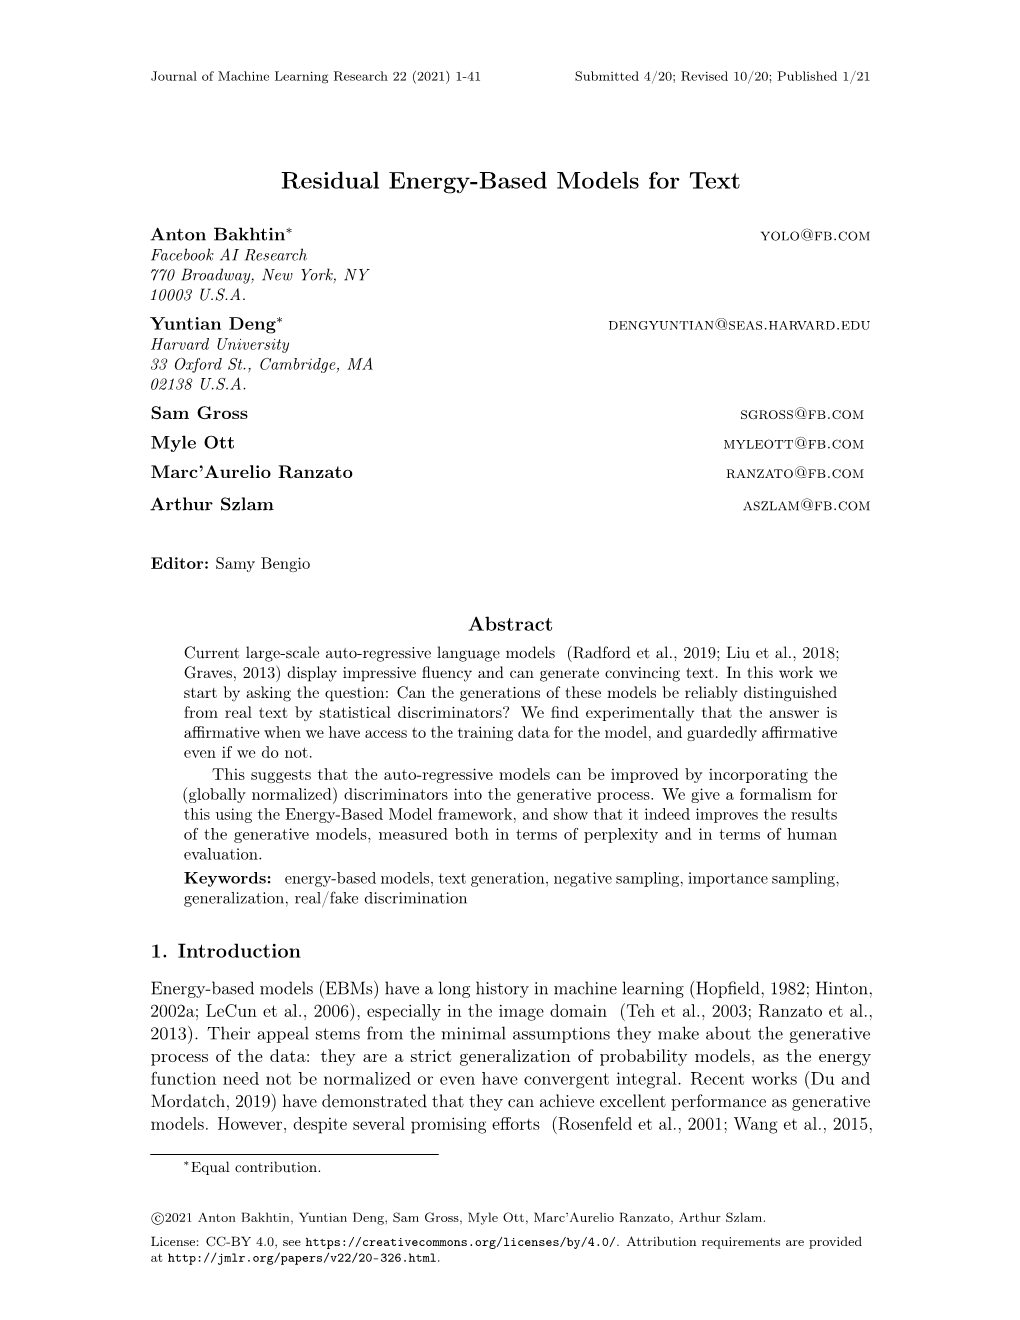 Residual Energy-Based Models for Text